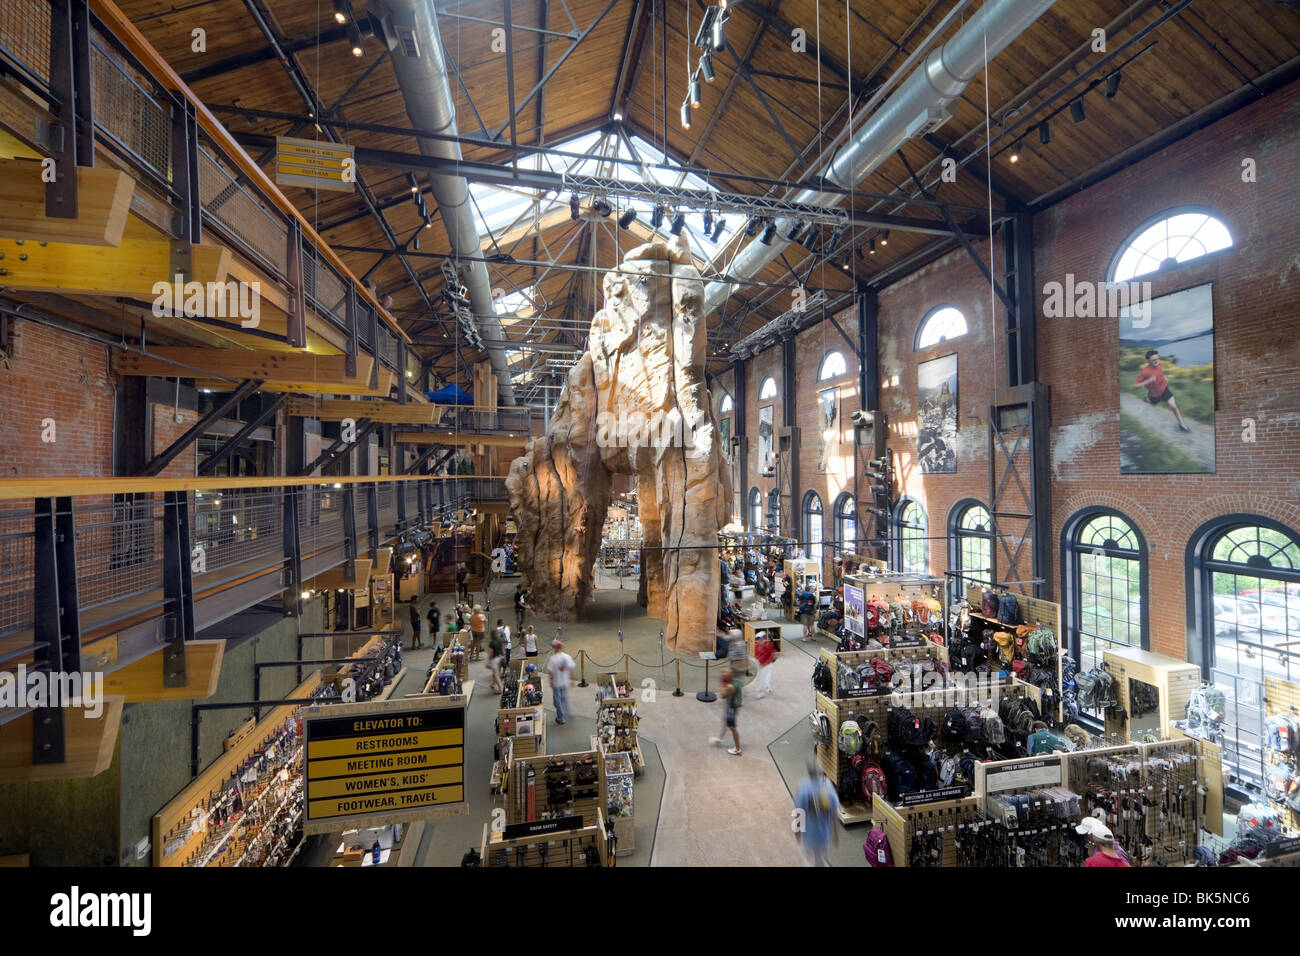 REI. Flagship R.E.I. store with indoor climbing wall. It is located in the restored 1901 Denver Tramway building. Denver Colorado. Stock Photo